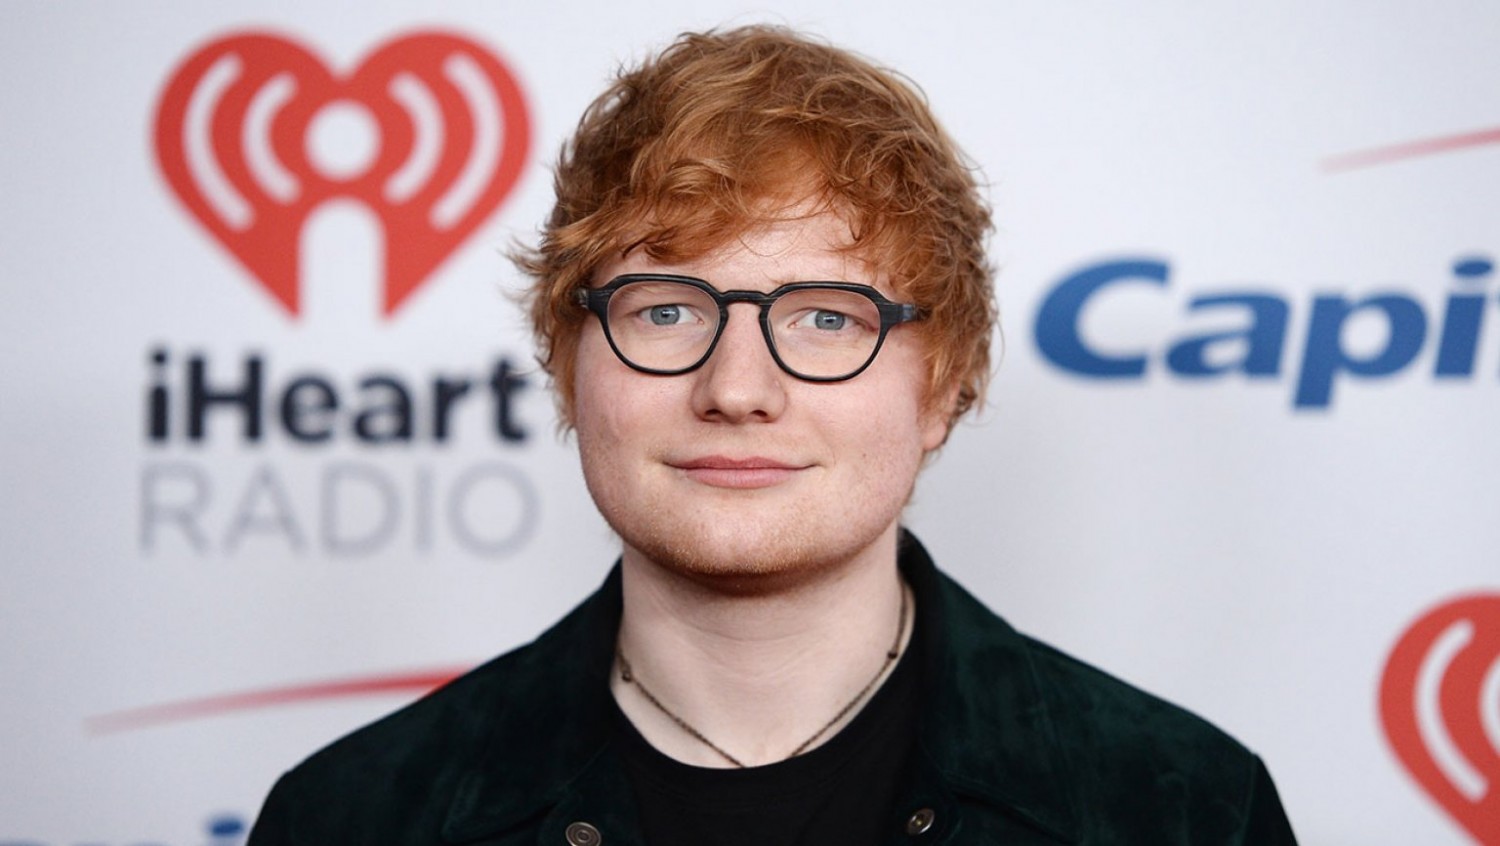 Ed Sheeran Taking a "Breather" From Music After Another Record-Setting Year